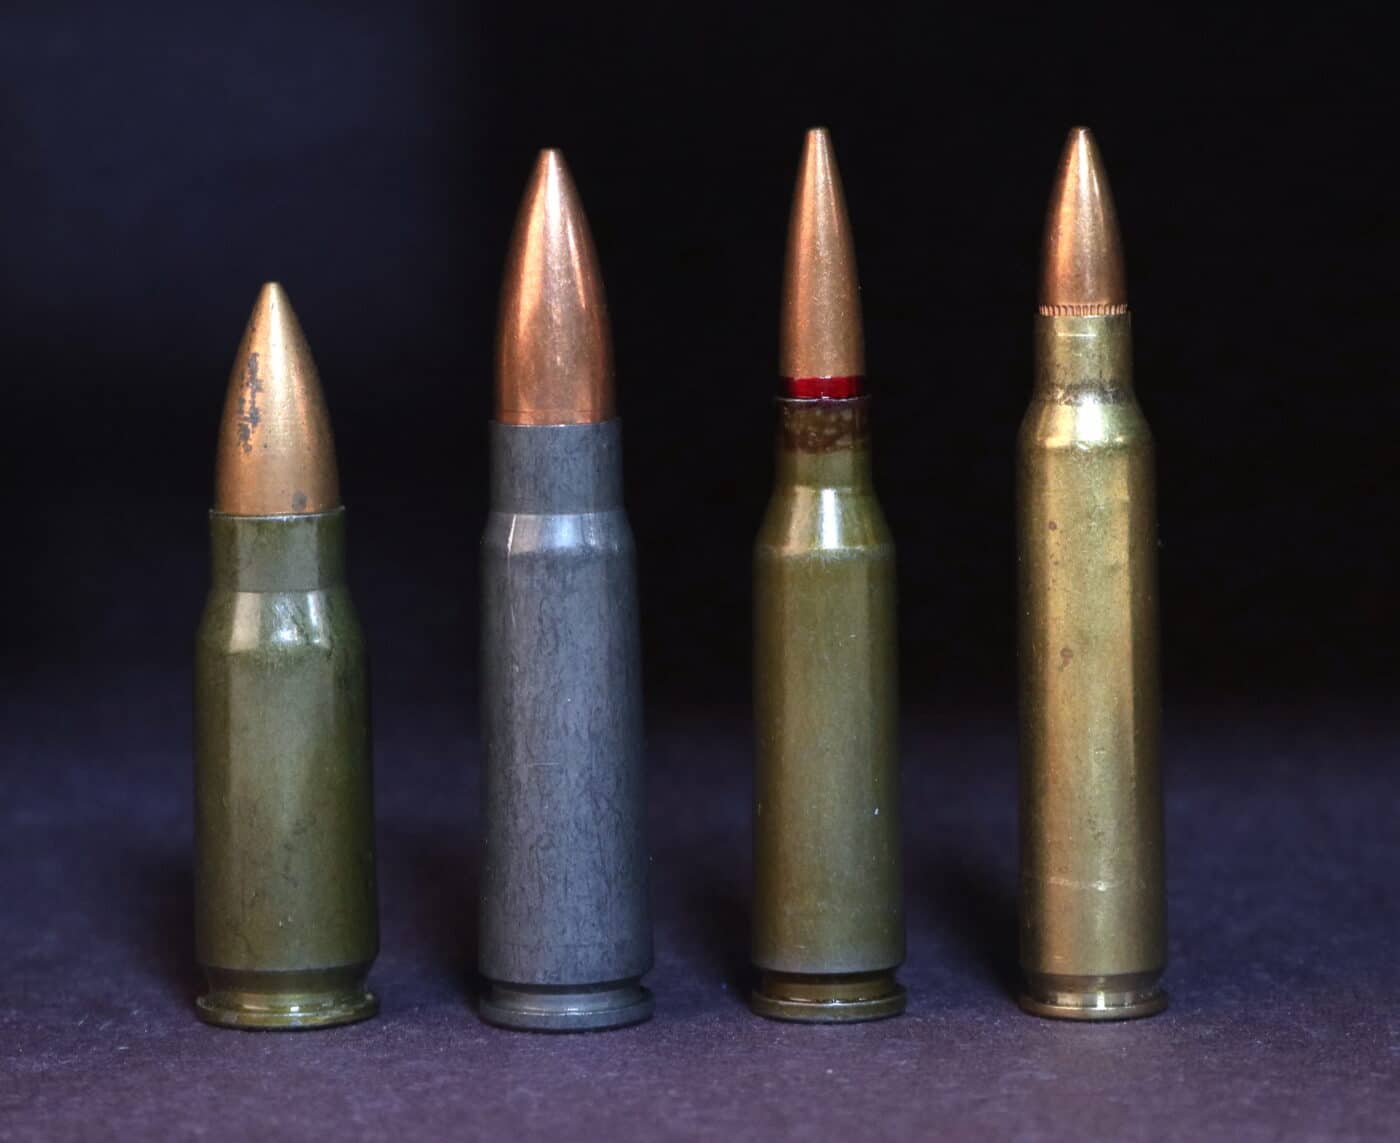 7.92x33mm Kurz for the German StG44, the AK-47’s 7.62x39mm, the AK-74’s 5.45x39mm, and the M16’s 5.56x45mm.